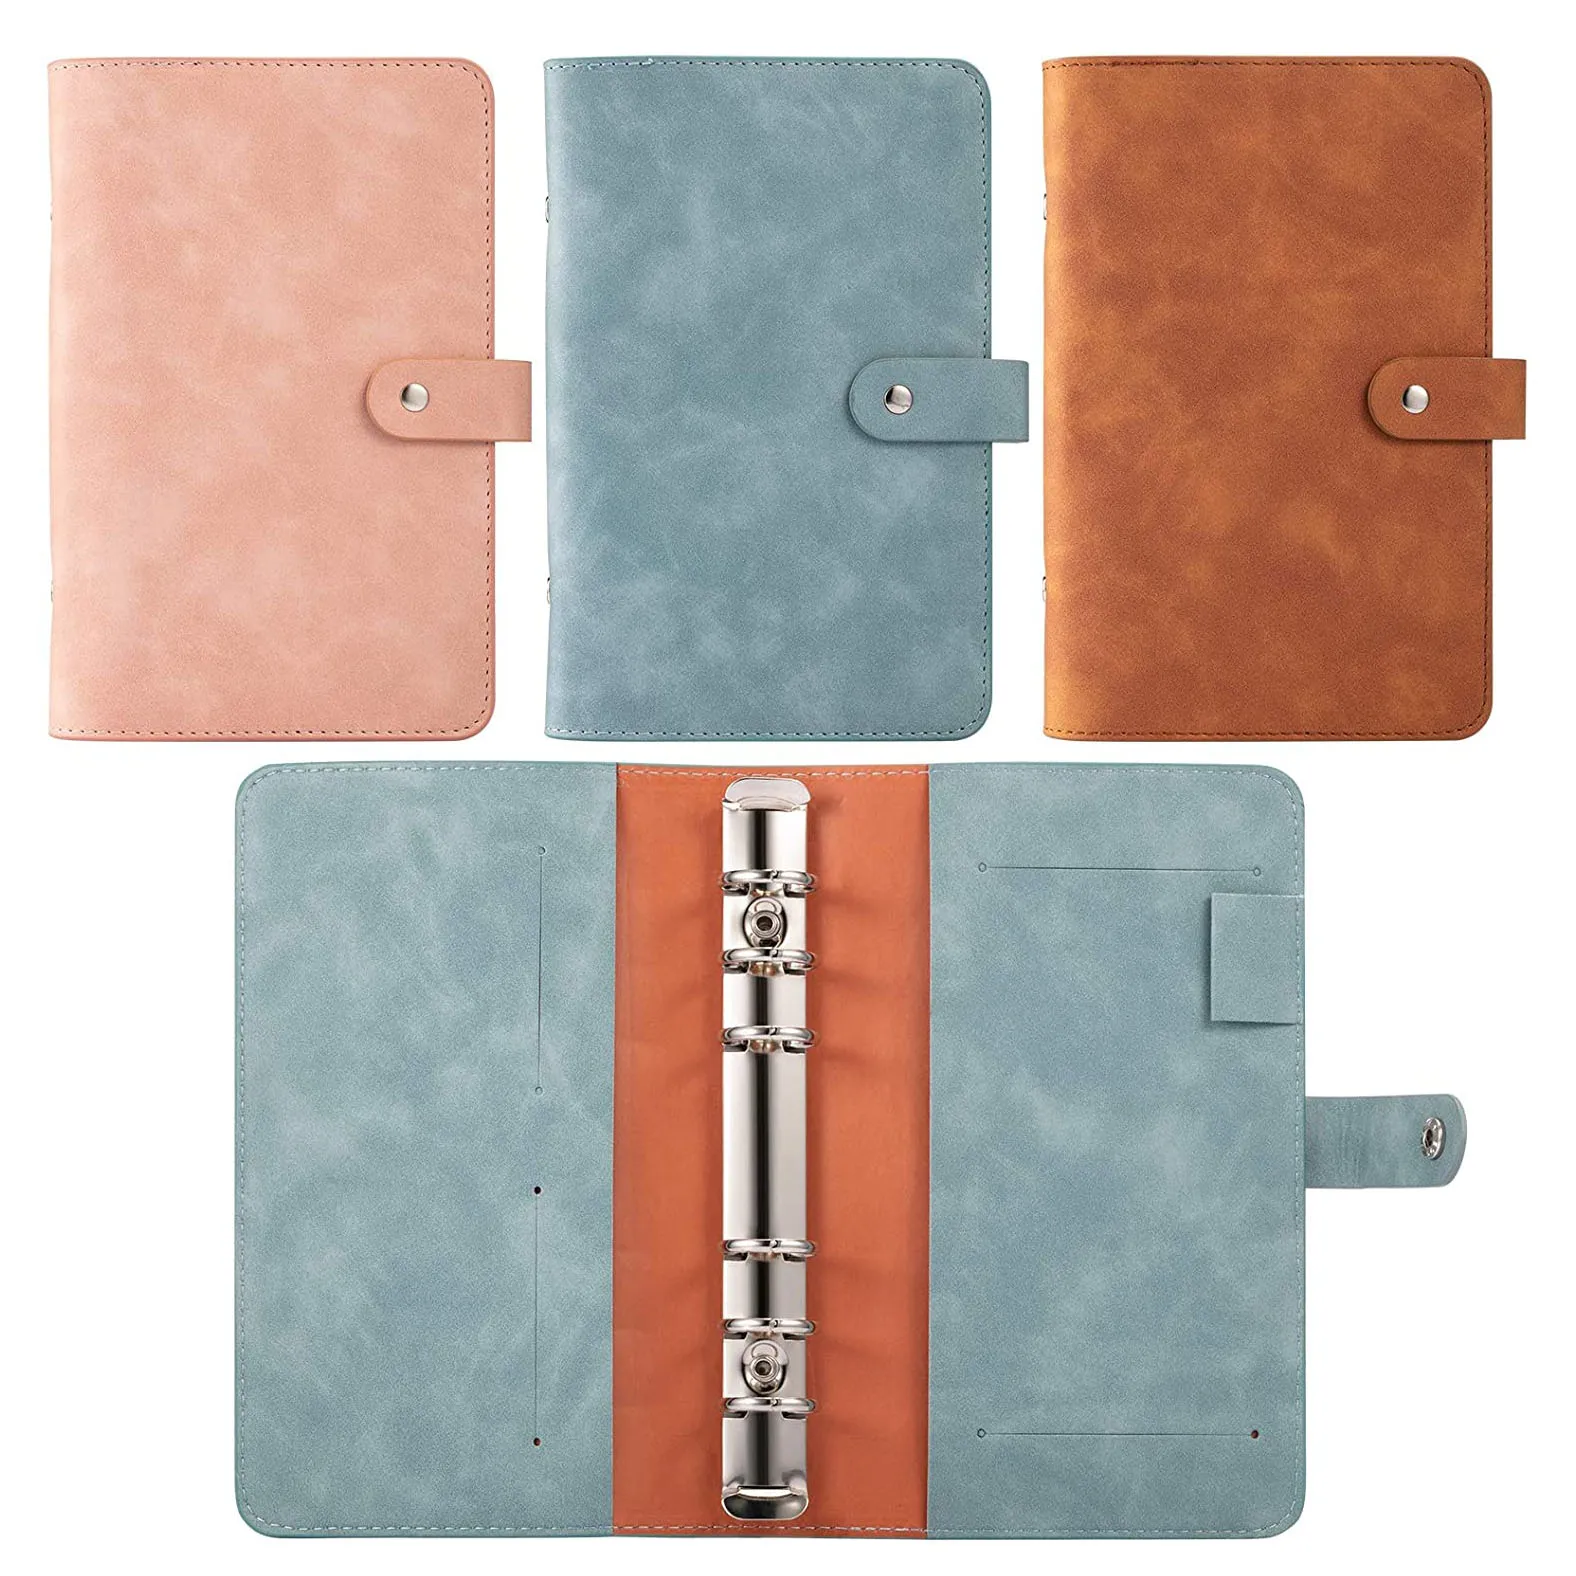 

A5 PU Leather Binder Cover,Refillable 6 Ring Notebook for A5 Filler Paper Personal Planning Binder with Magnetic Buckle Closure